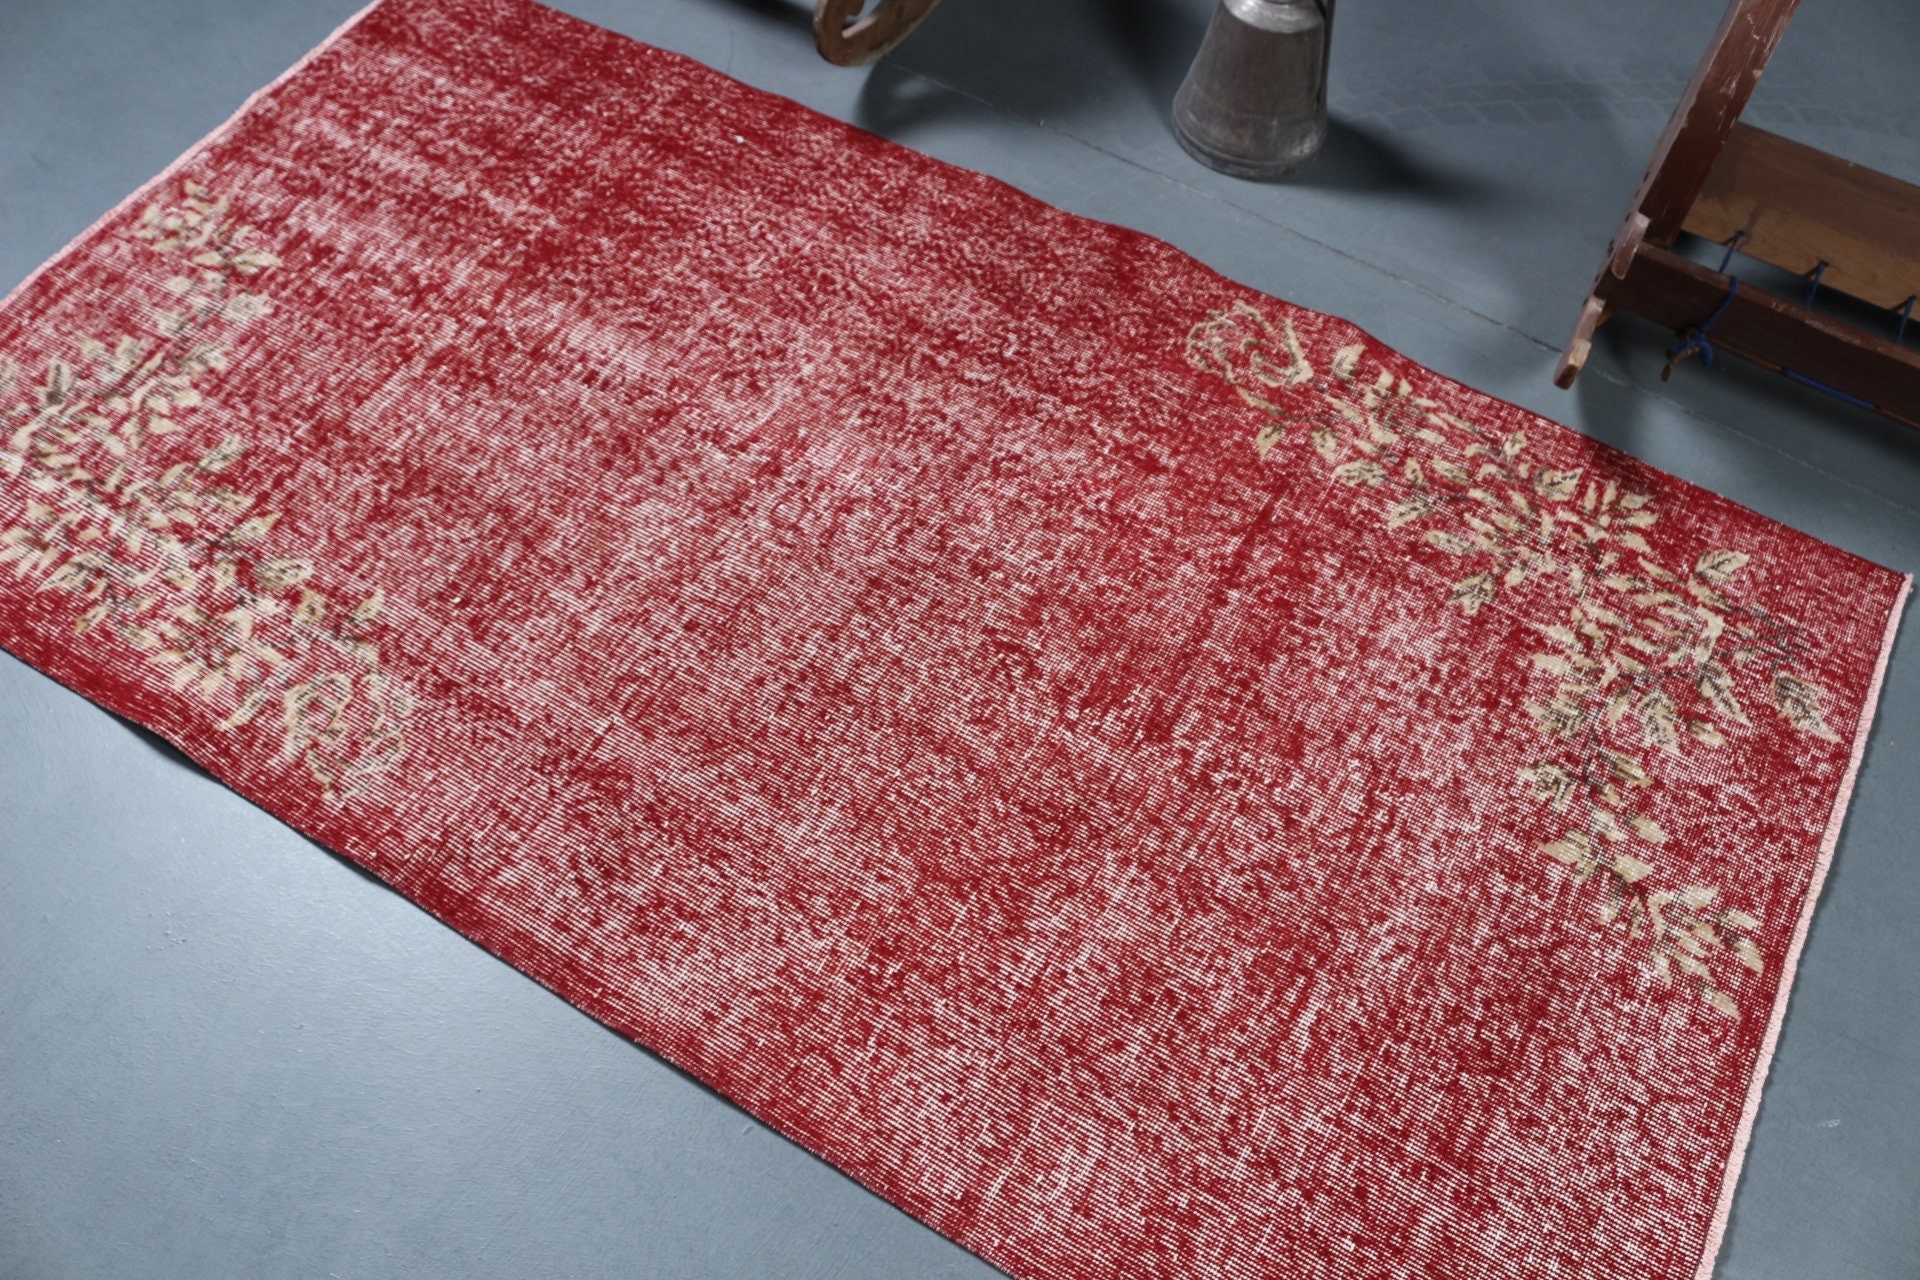 Moroccan Rug, Red Home Decor Rug, Oushak Rug, 3.6x6.5 ft Accent Rugs, Vintage Rug, Turkish Rugs, Rugs for Entry, Bedroom Rug, Kitchen Rug